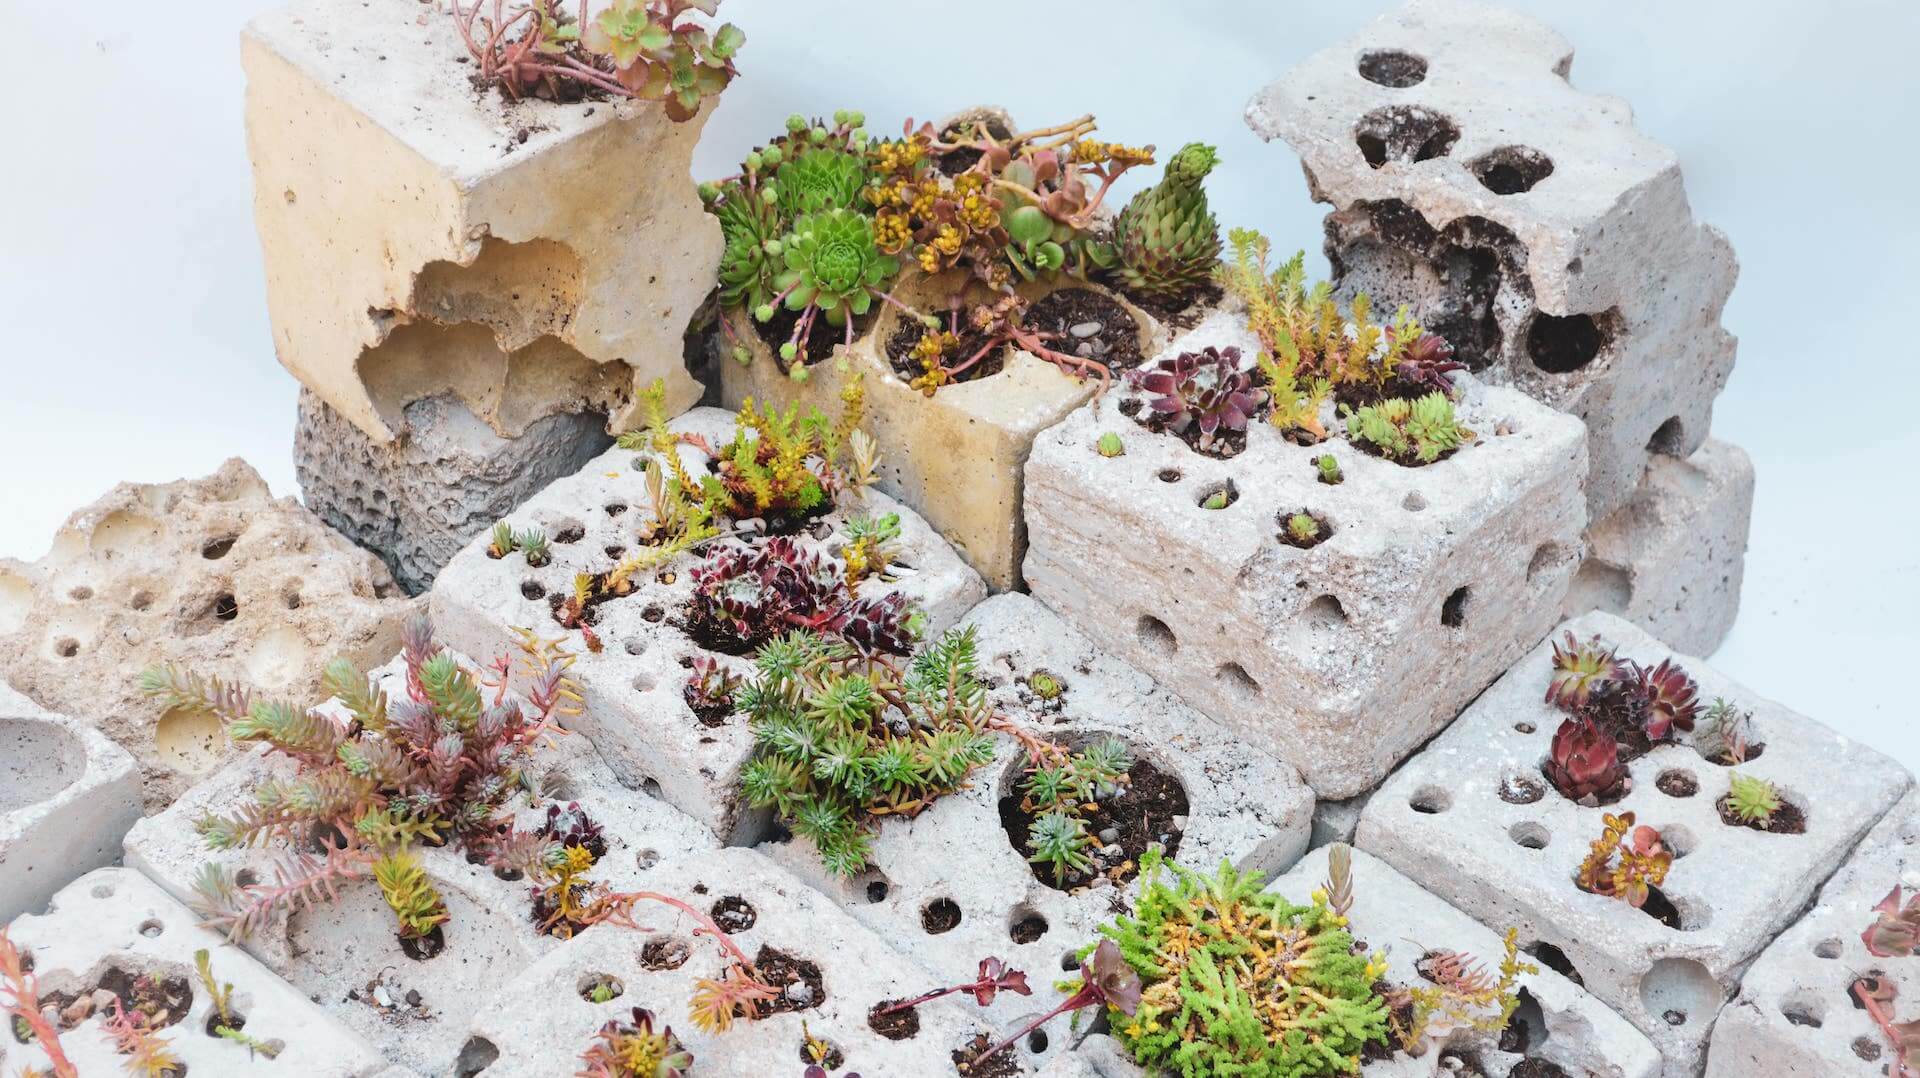 A selection of small concrete blocks with plants growing in them